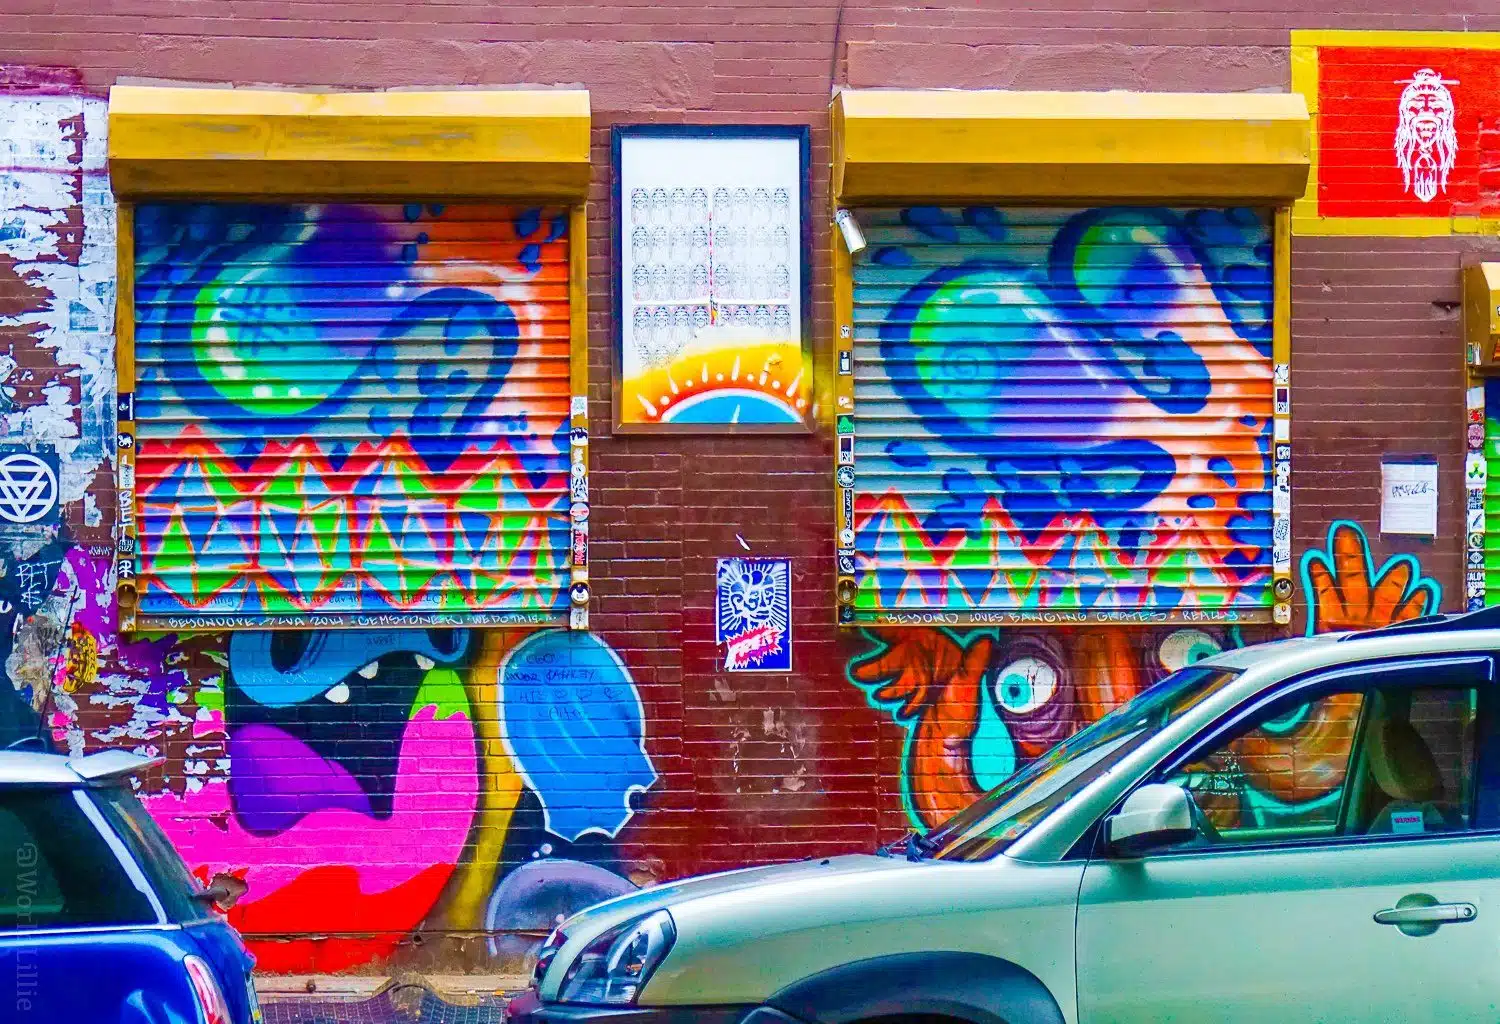 What a riot of color on that wall!